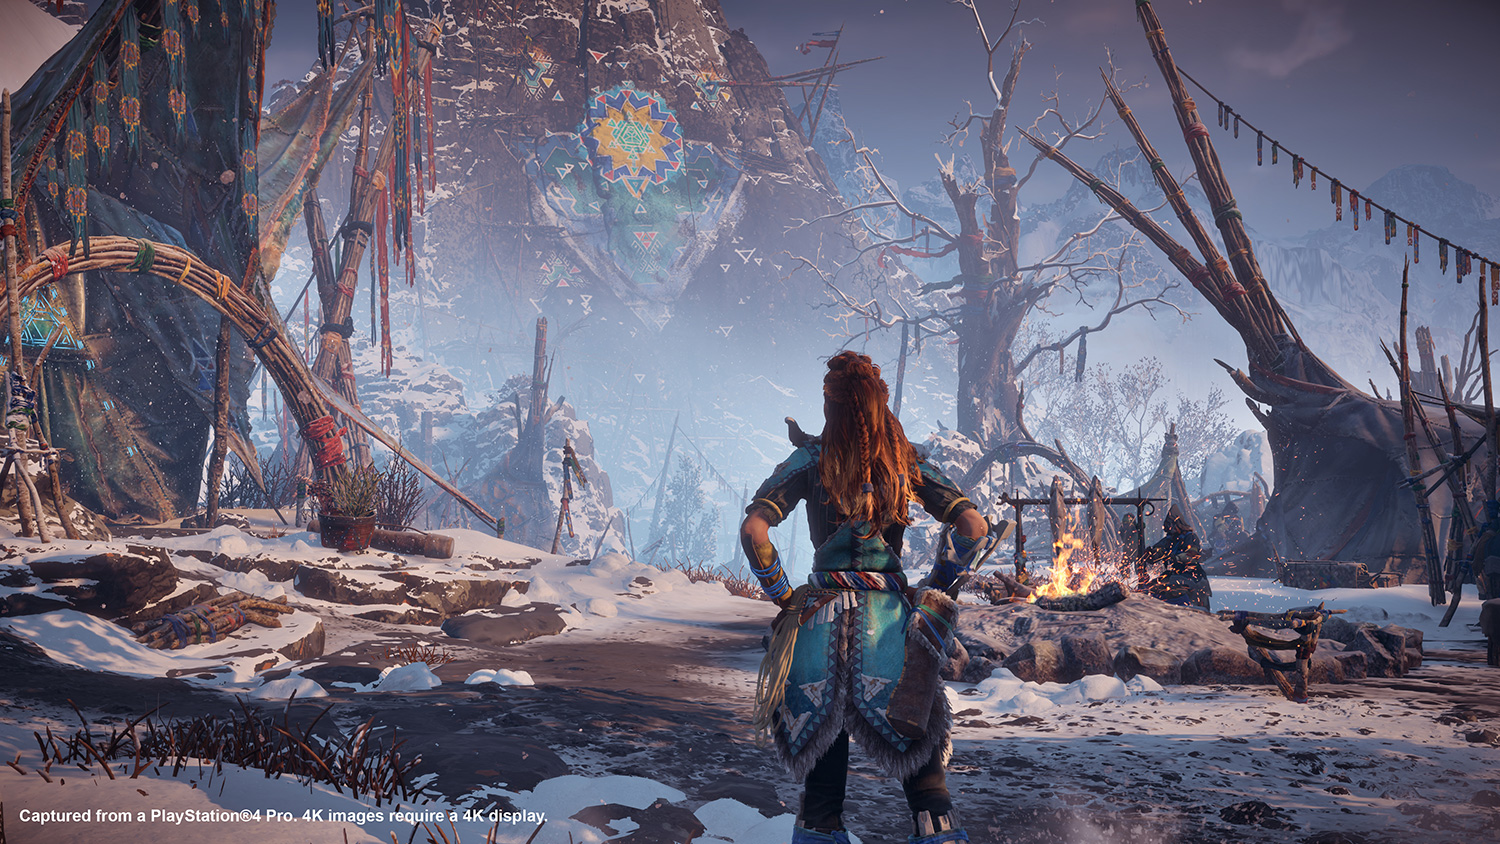 5 things you need to know before starting Horizon Zero Dawn: The